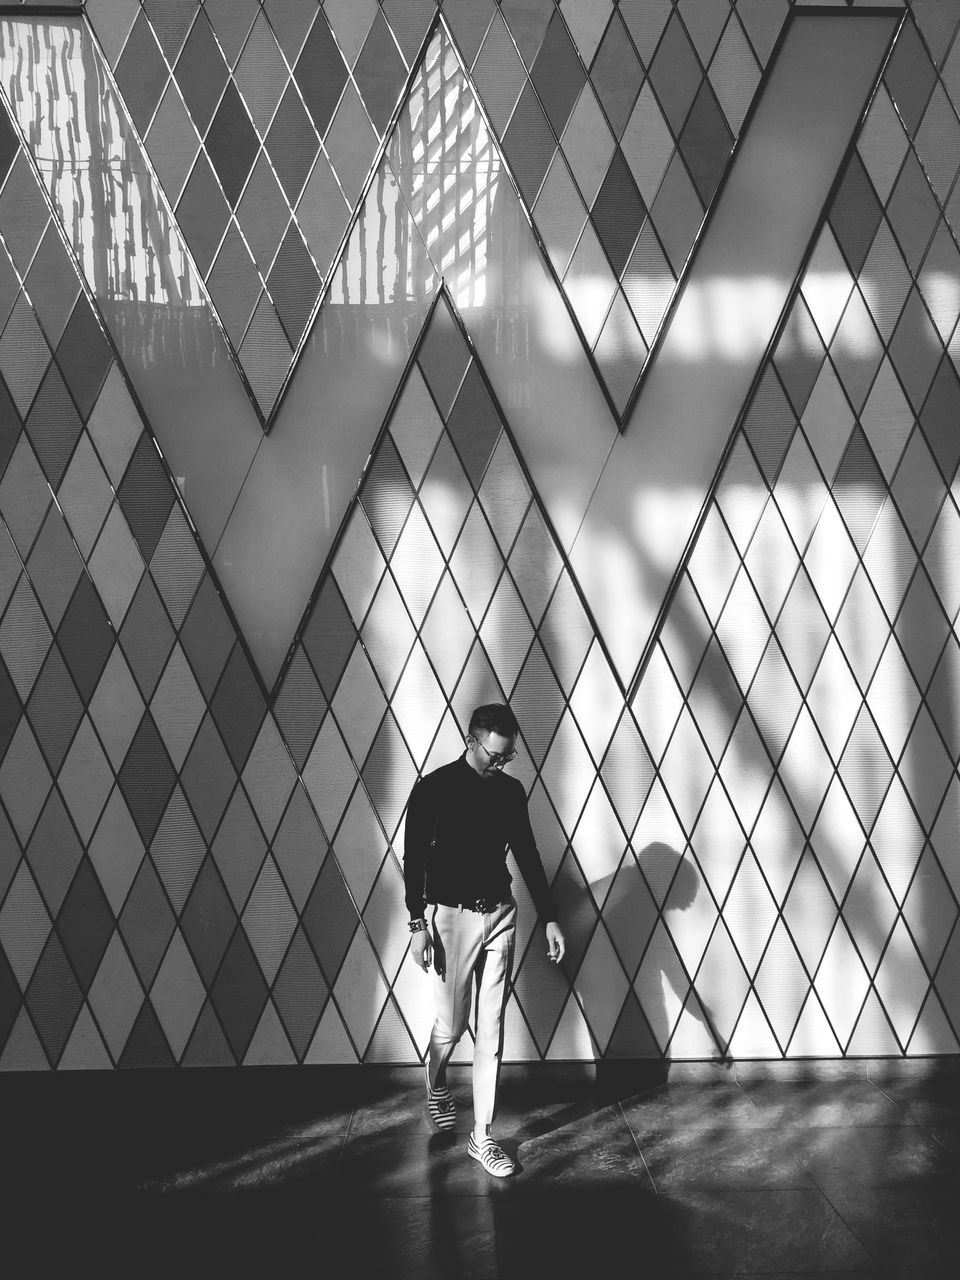 indoors, lifestyles, glass - material, leisure activity, full length, standing, men, reflection, transparent, window, architecture, rear view, person, built structure, walking, modern, pattern, glass